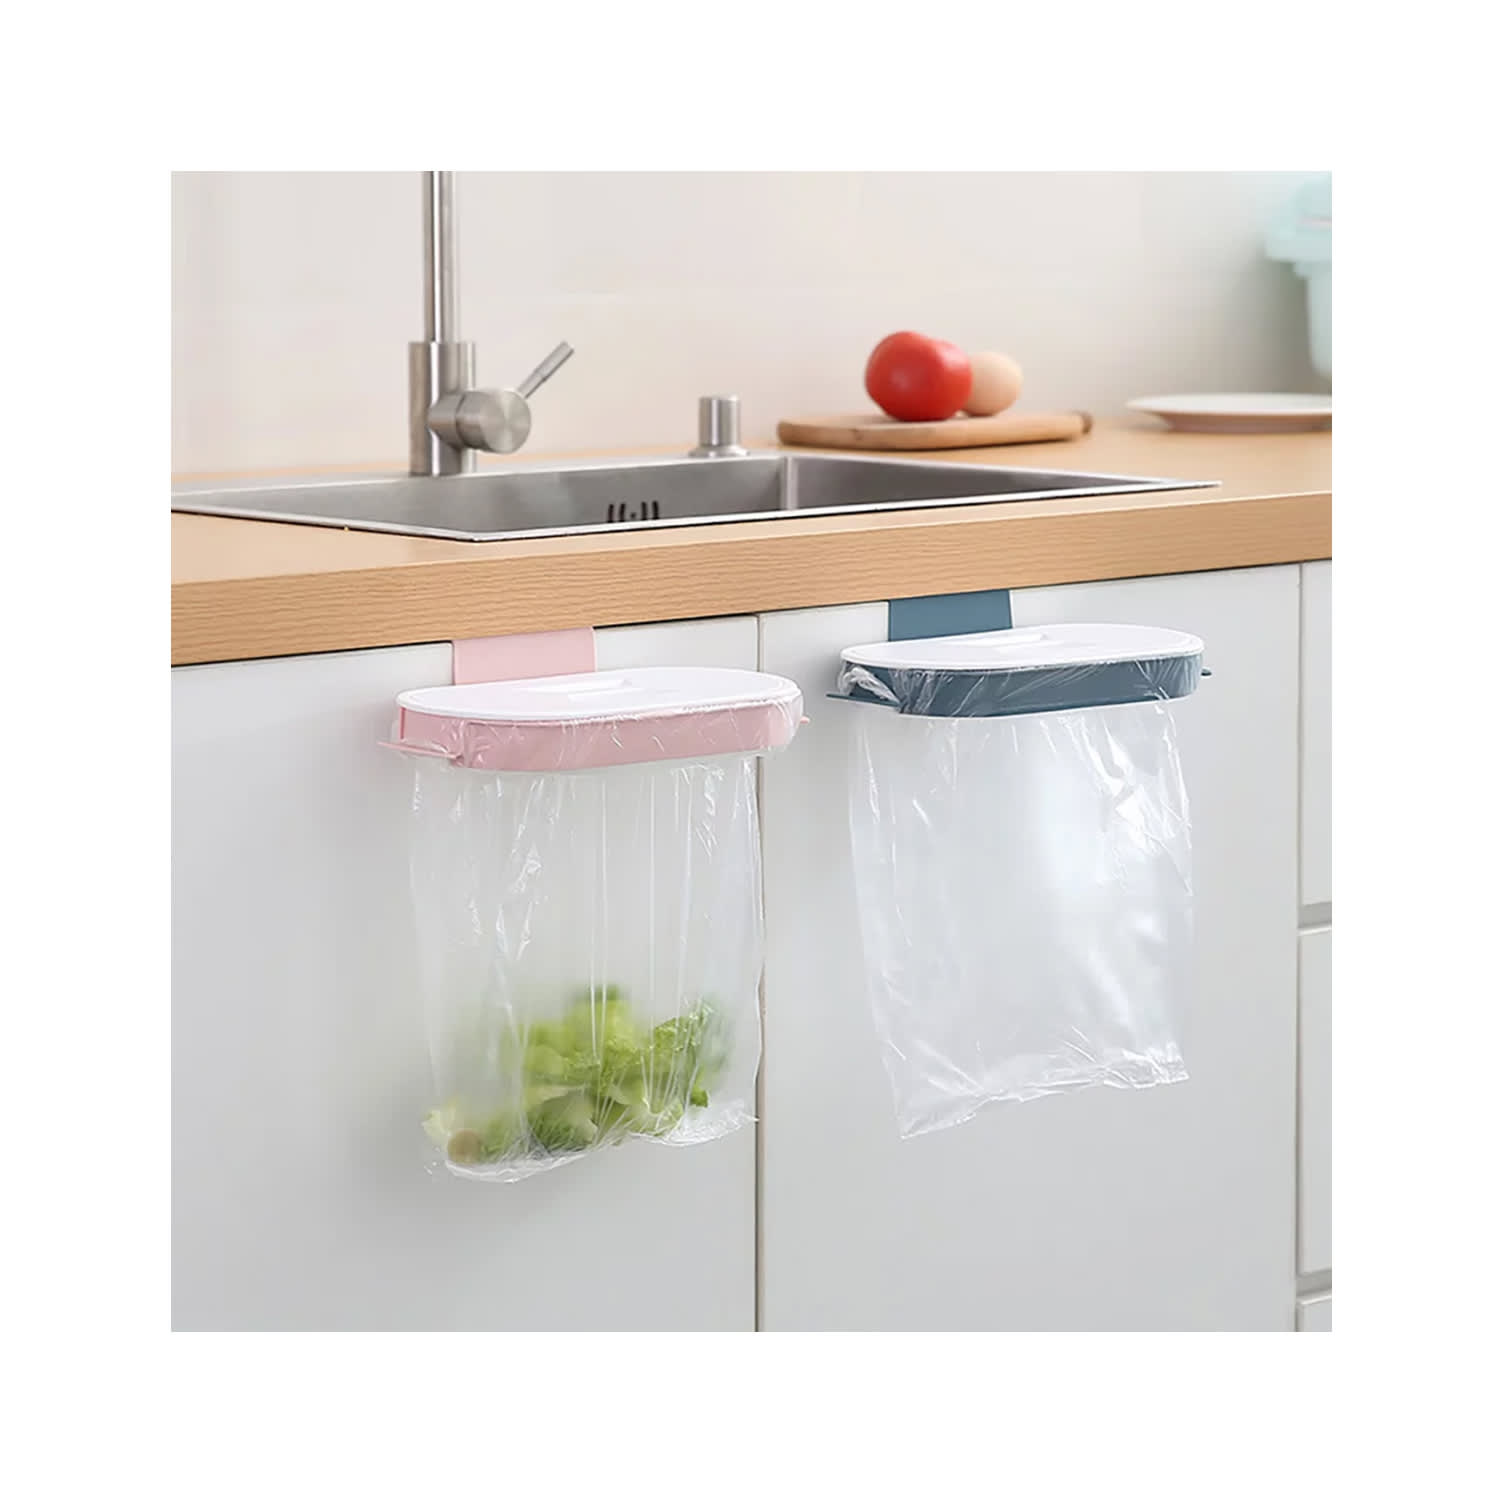 The 9 Best Hanging Trash Cans With Lids